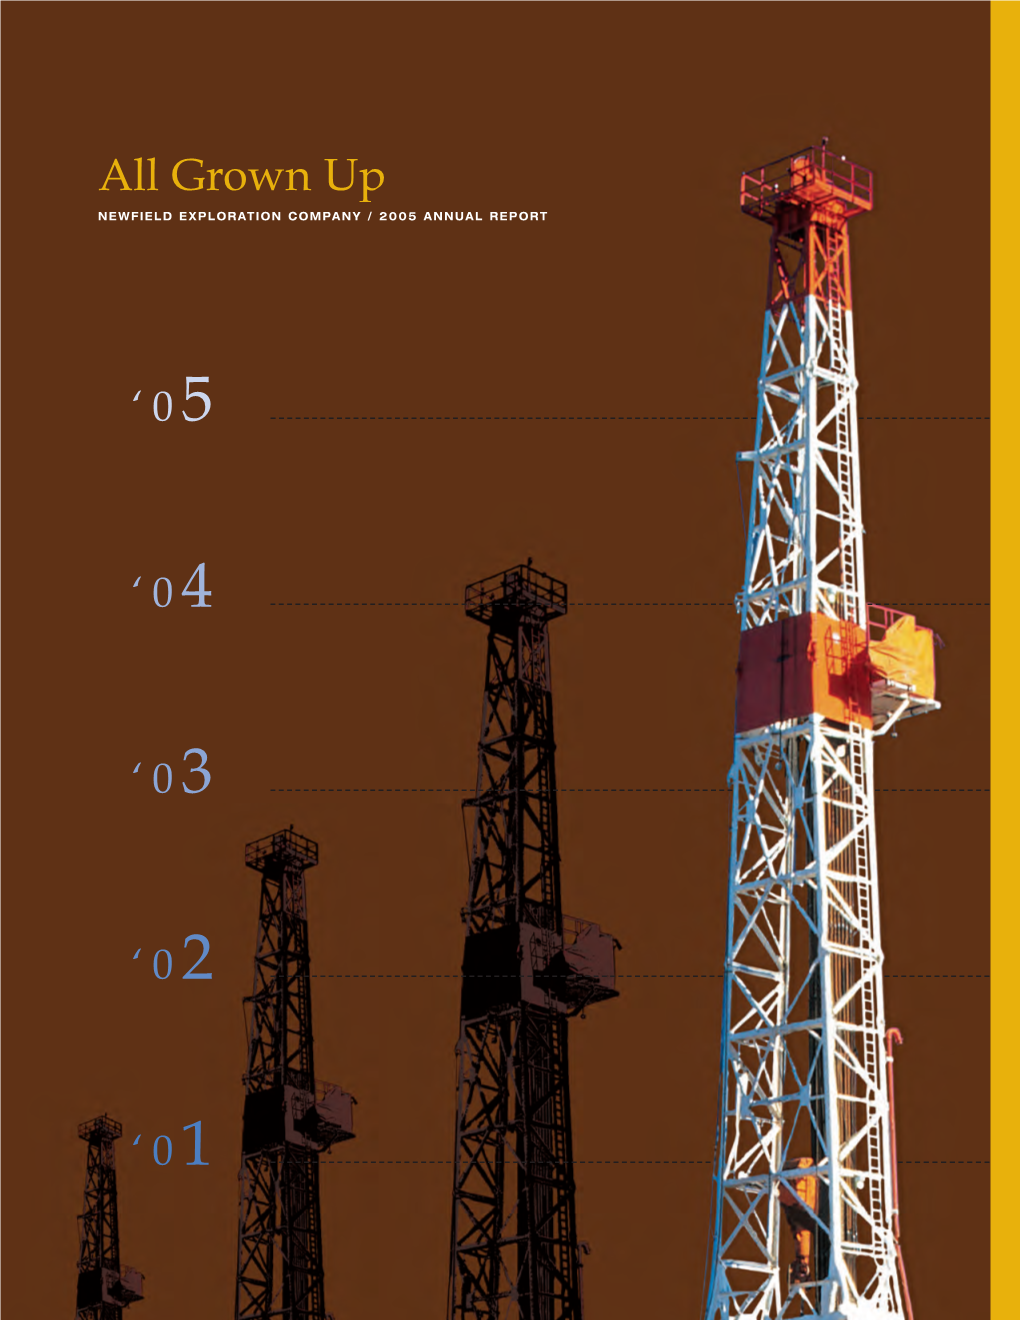 Grown up Suite 2020 NEWFIELD EXPLORATION COMPANY / 2005 ANNUAL REPORT Houston, Texas 77060 281-847-6000